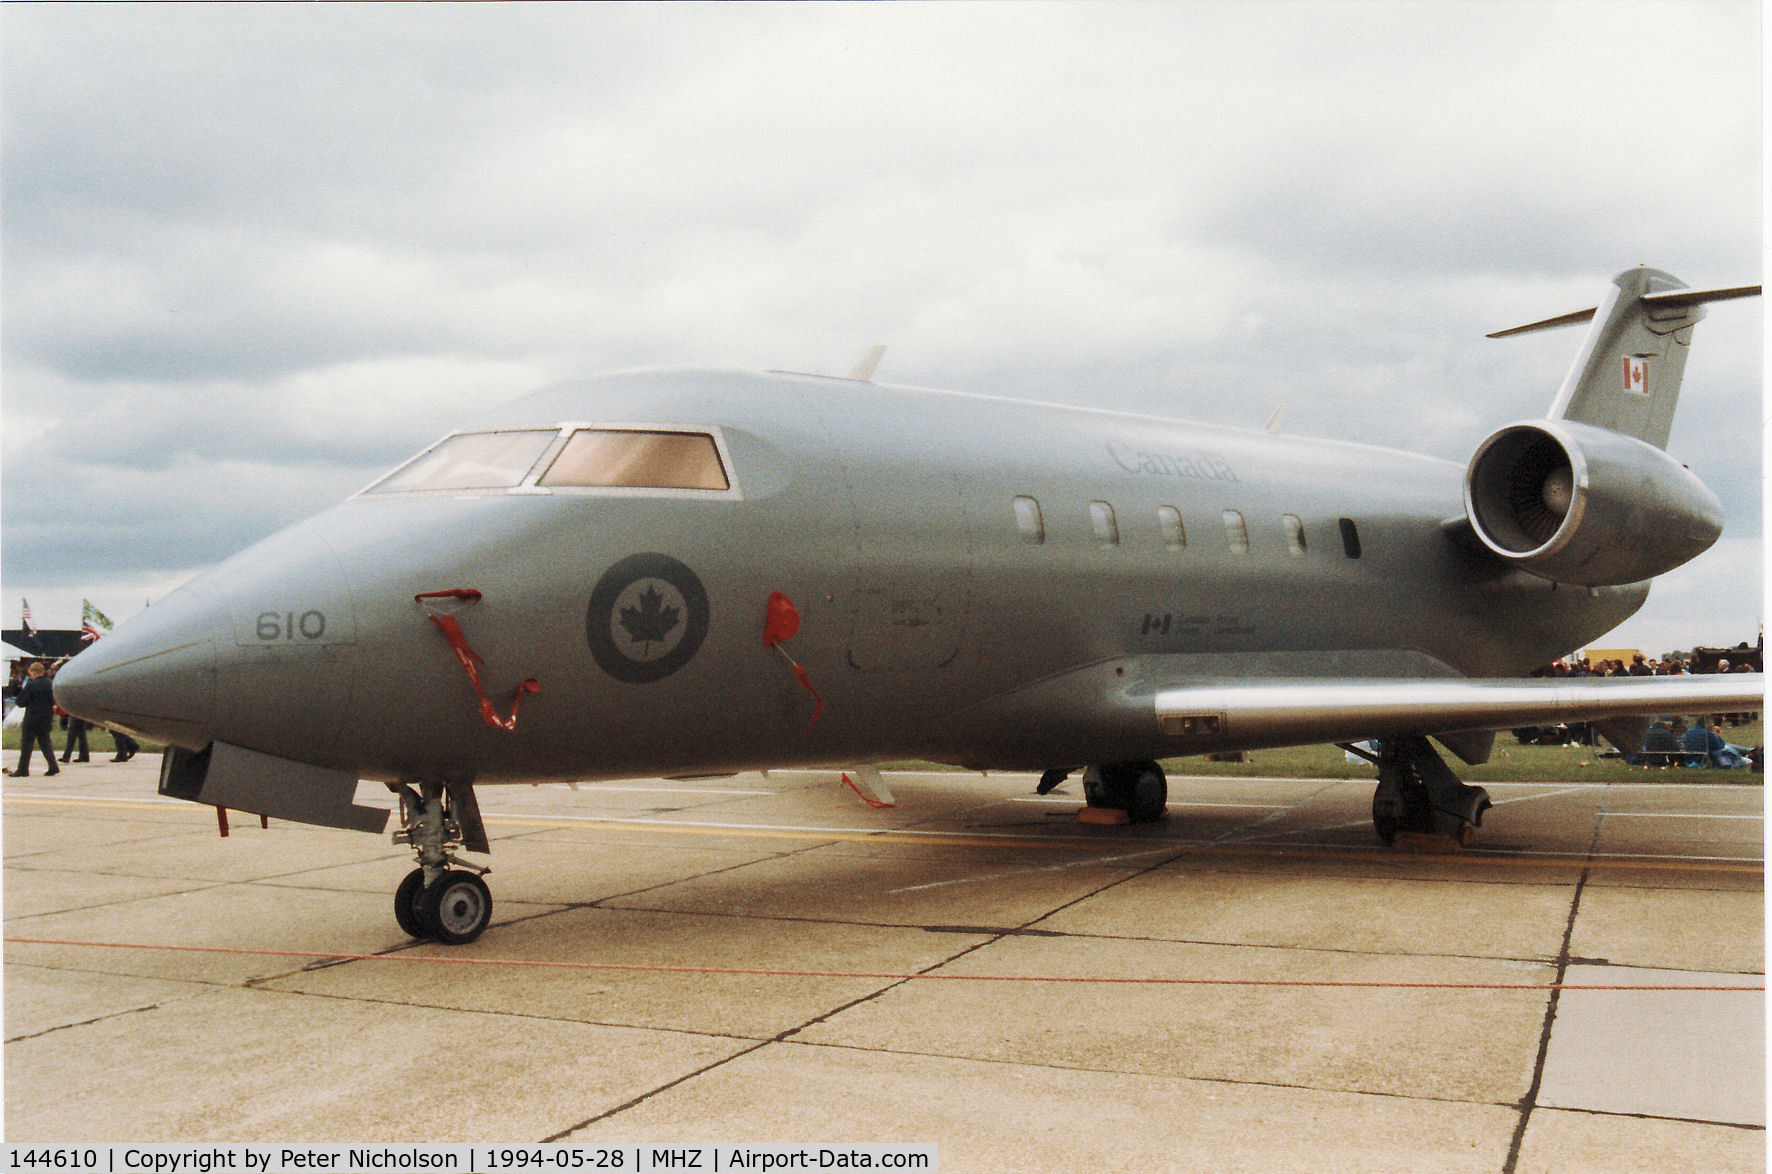 144610, 1981 Canadair CC-144A Challenger (600S/CL-600-1A11) C/N 1022, Another view of the 434 Squadron Canadian Armed Forces CC-144 Challenger on display at the 1994 Mildenhall Air Fete.